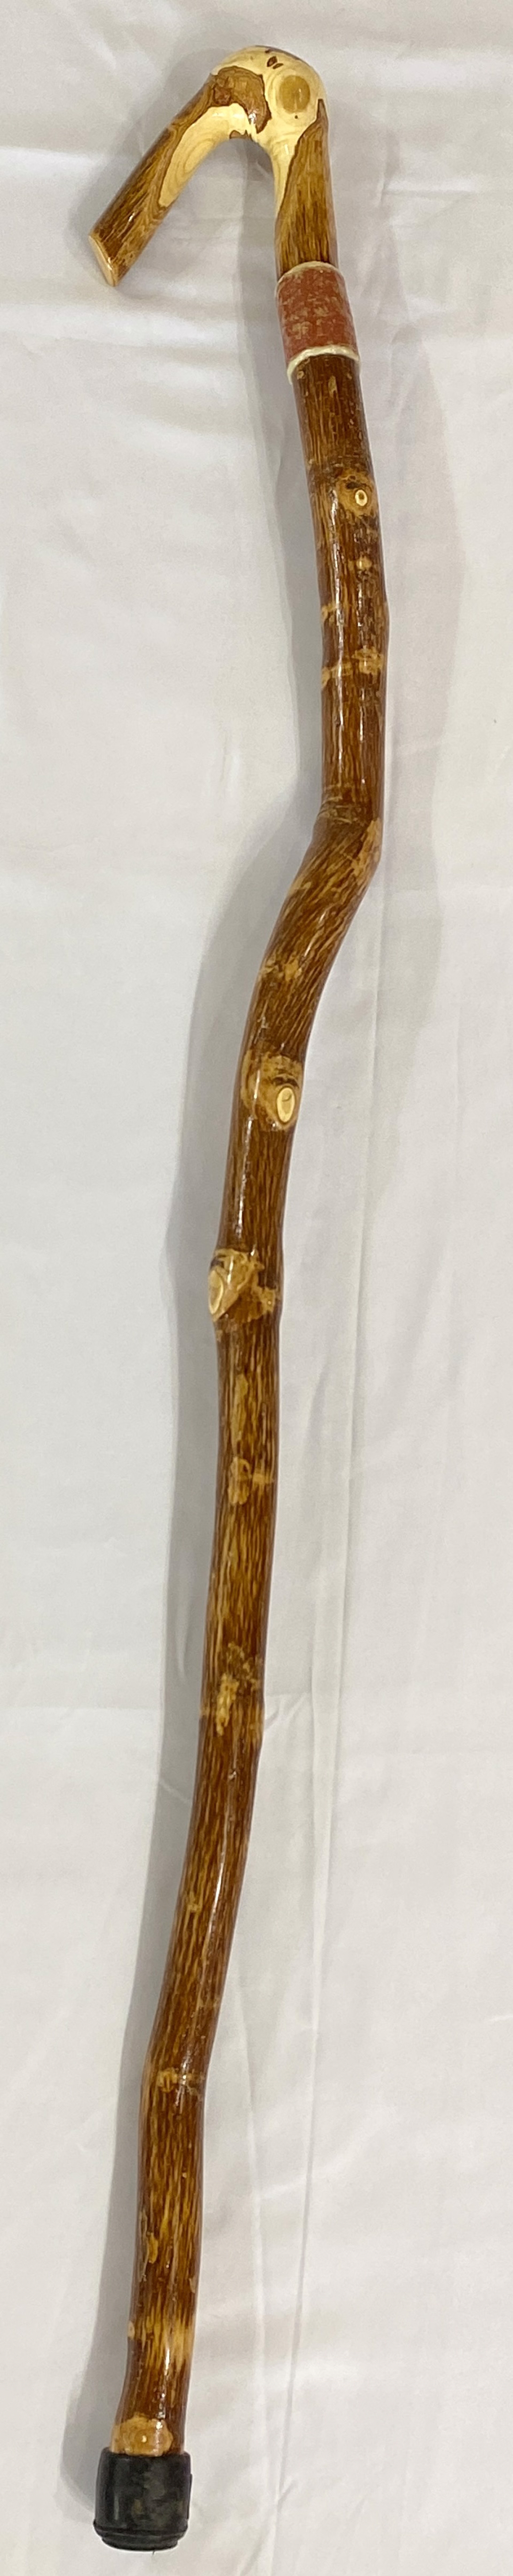 Wooden Walking Stick #11 by Kevin Foote